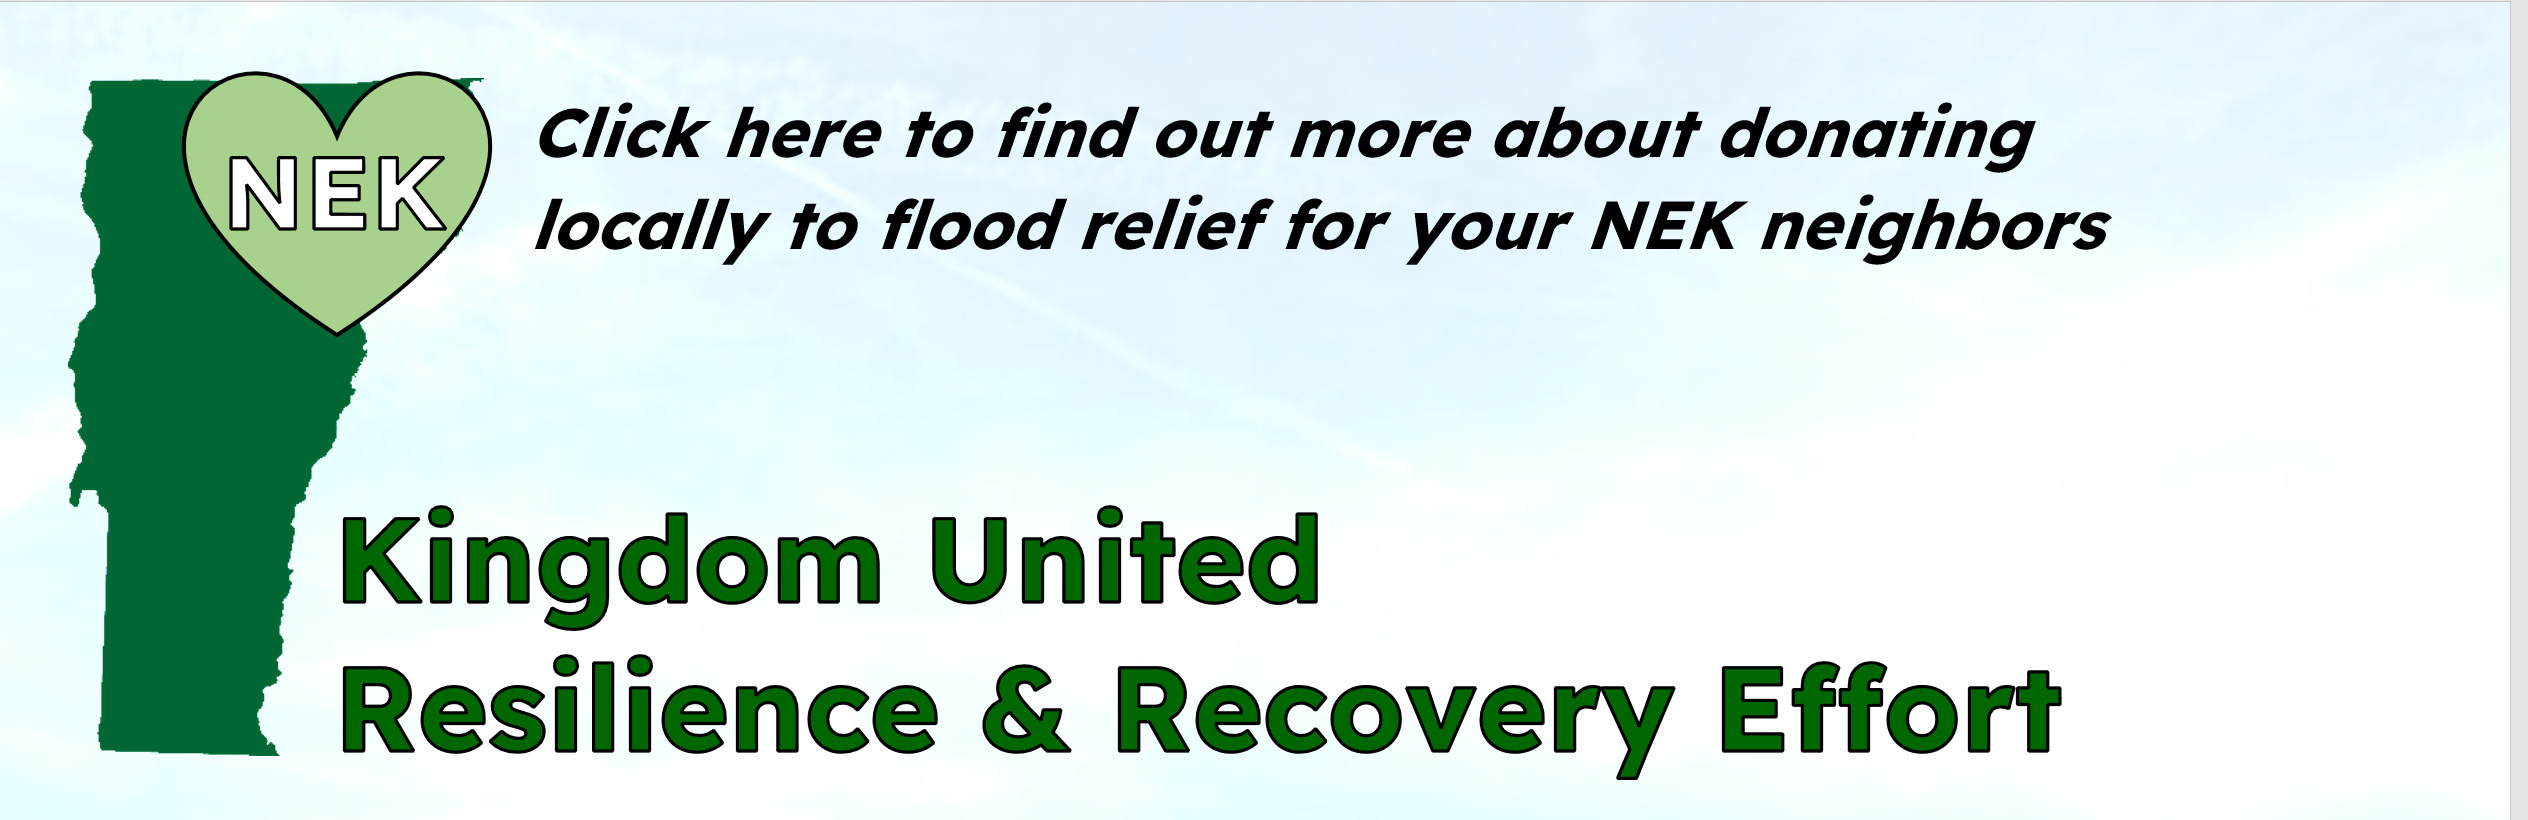 State of VT shape in green with letter N-E-K in top right corner in front of blue sky background and text about clicking image to find out more about donating locally to flood relief efforts in the Northeast Kingdom